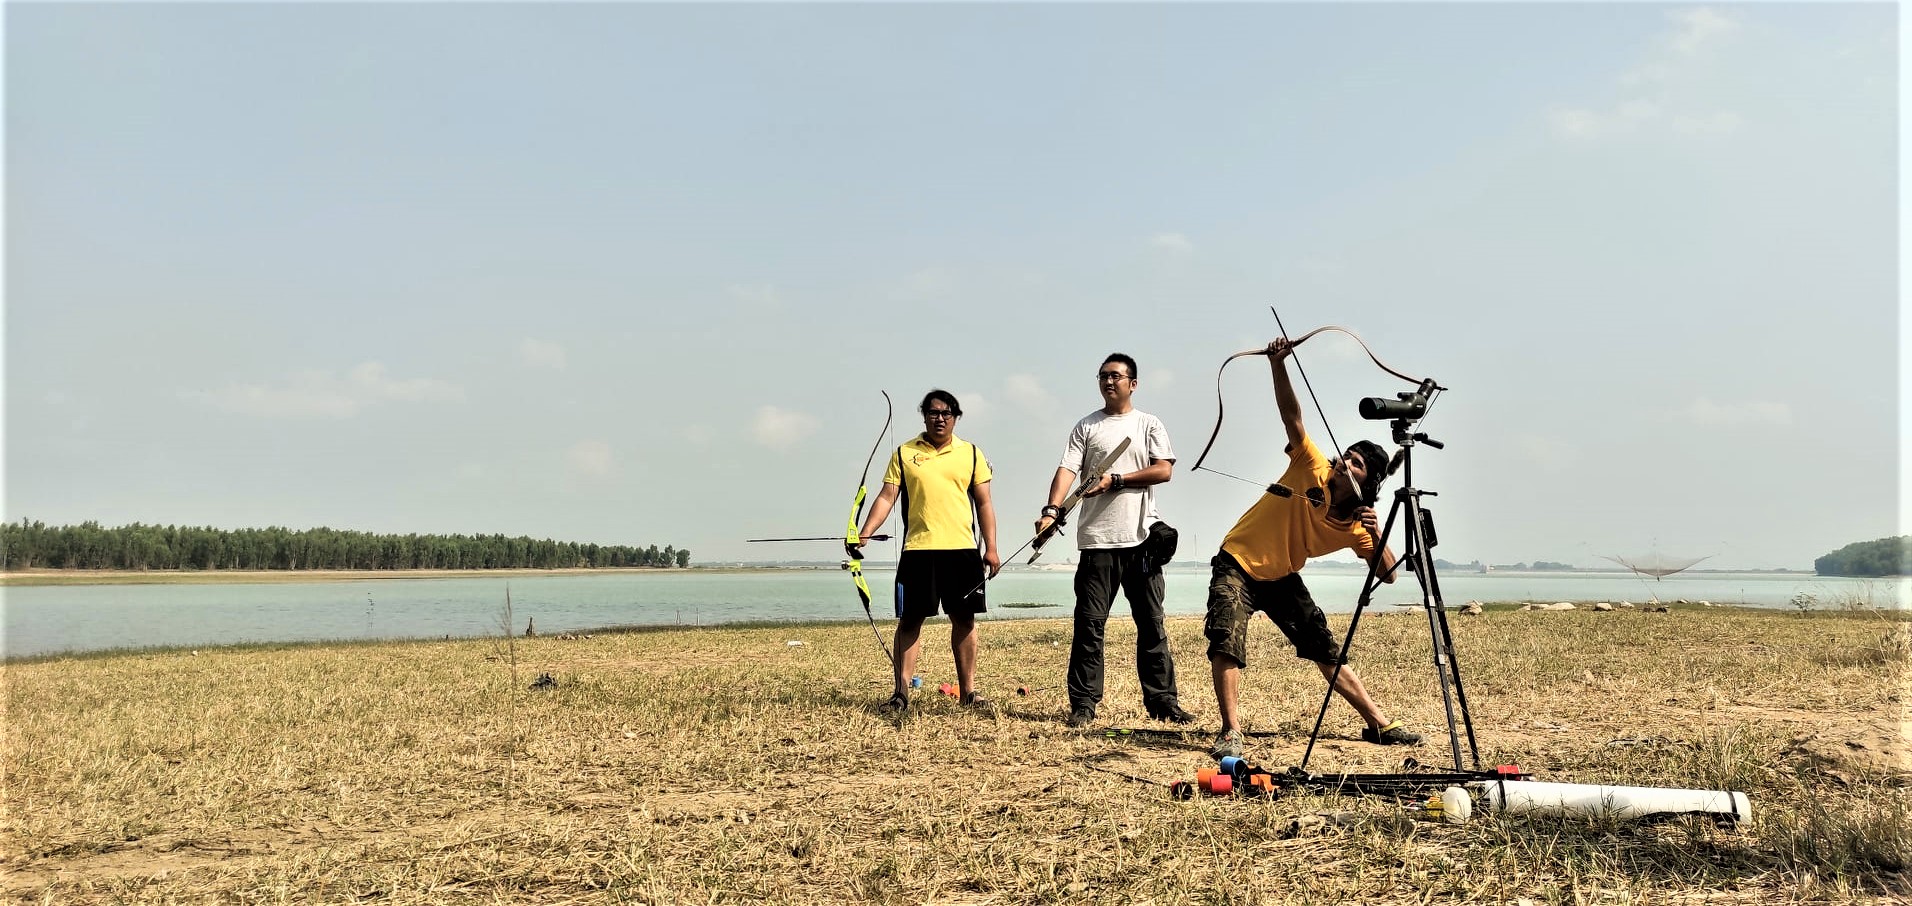 Archery District 3 - Tran Quan Brothers Archery Club in Vietnam, East Asia | Archery - Rated 1.4